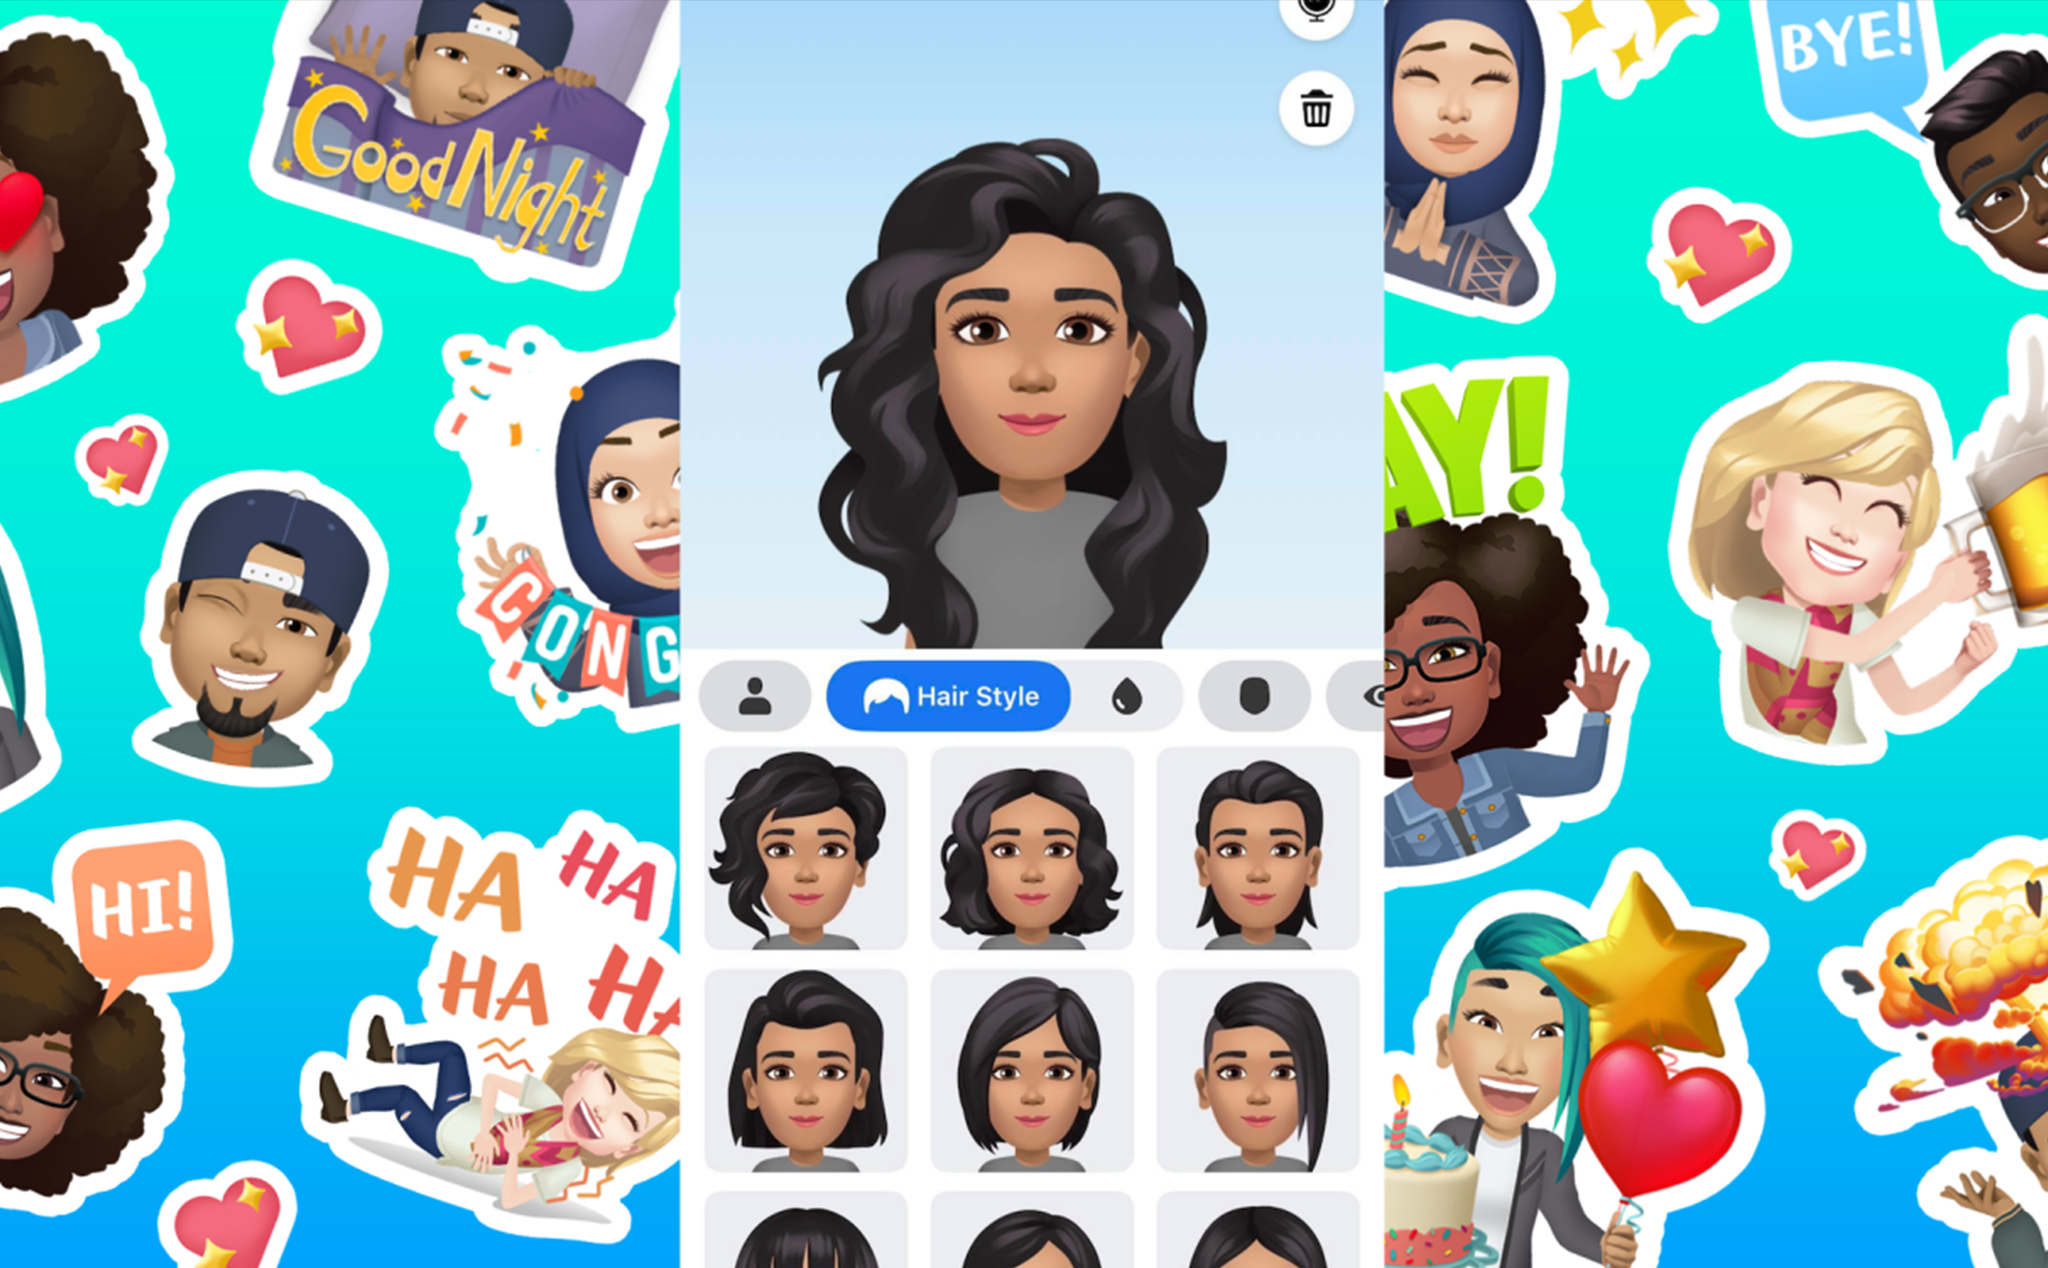 Digital avatars rollout in the US for Facebook and Messenger